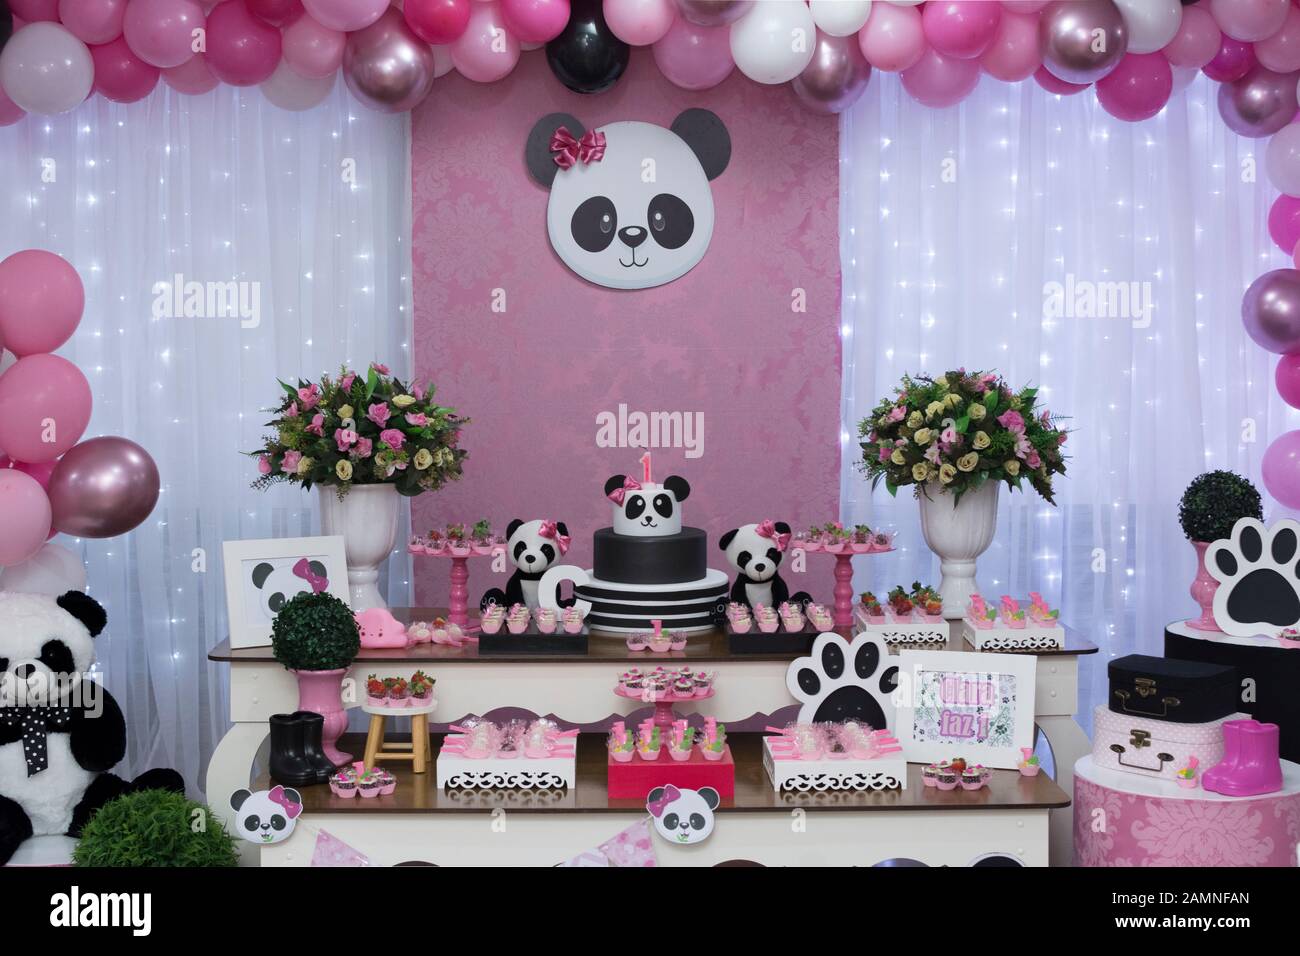 Panda Cake High Resolution Stock Photography And Images Alamy